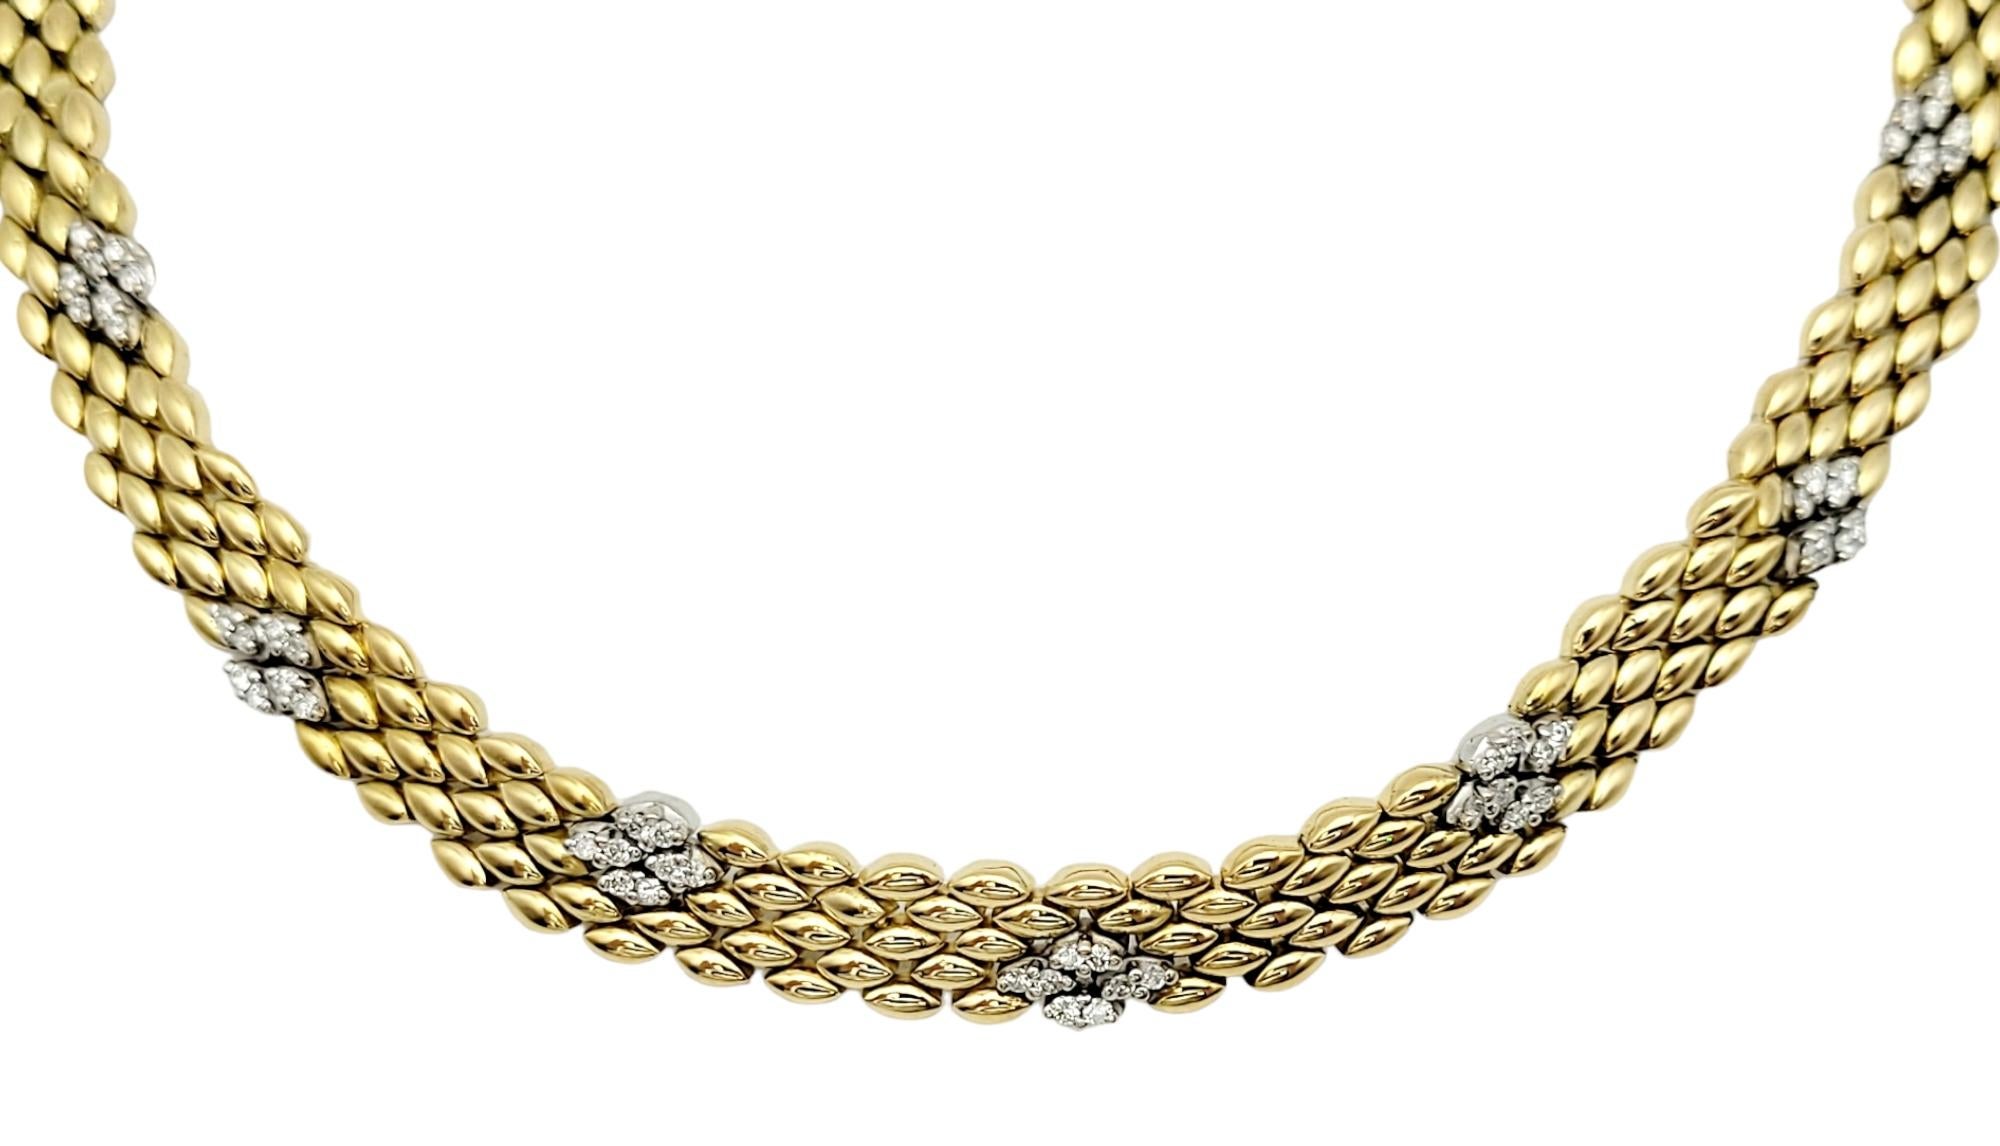 Incredibly stunning diamond and gold panther link necklace. This beautiful necklace features 52 diamonds throughout the chain. The diamonds are round and brilliant, G-H in color and SI-1 to SI-2 in clarity. The total carat weight of diamonds is 0.75